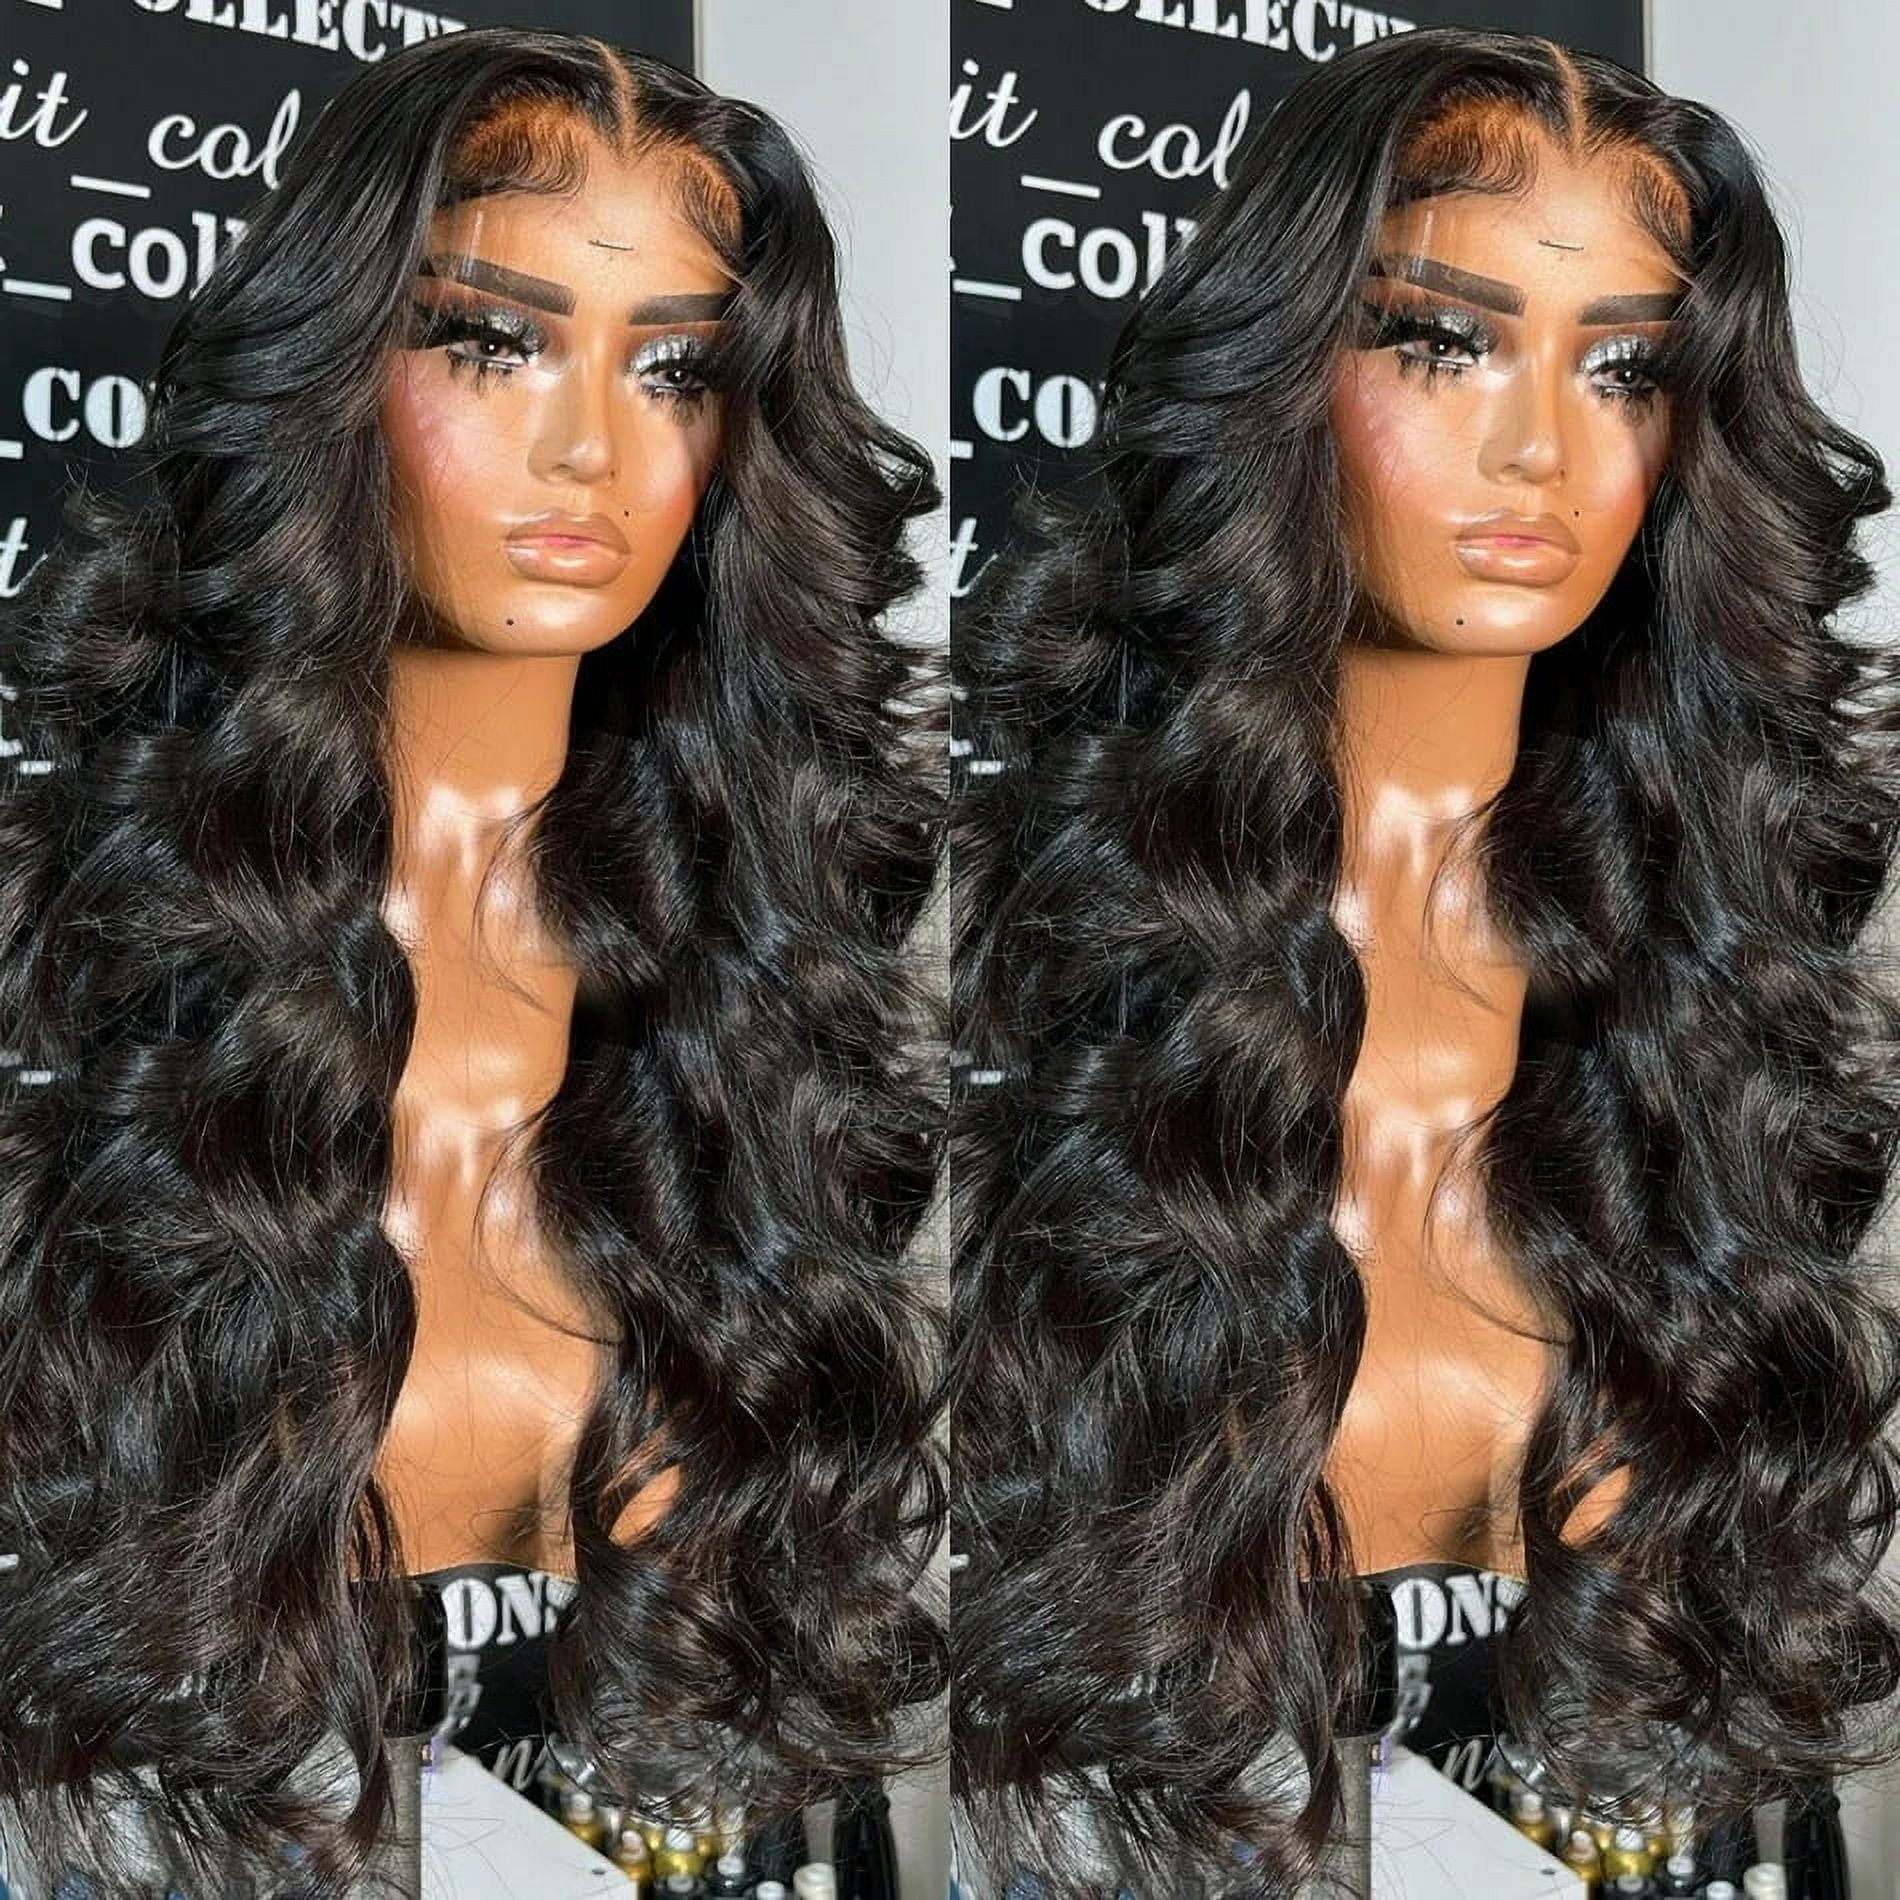 360 Body Wave Lace Frontal Wigs Human Hair Brazilian Black Women 150%  Density Pre Plucked With Baby Hair 100% Unprocessed Virgin Human Hair (16  inch)